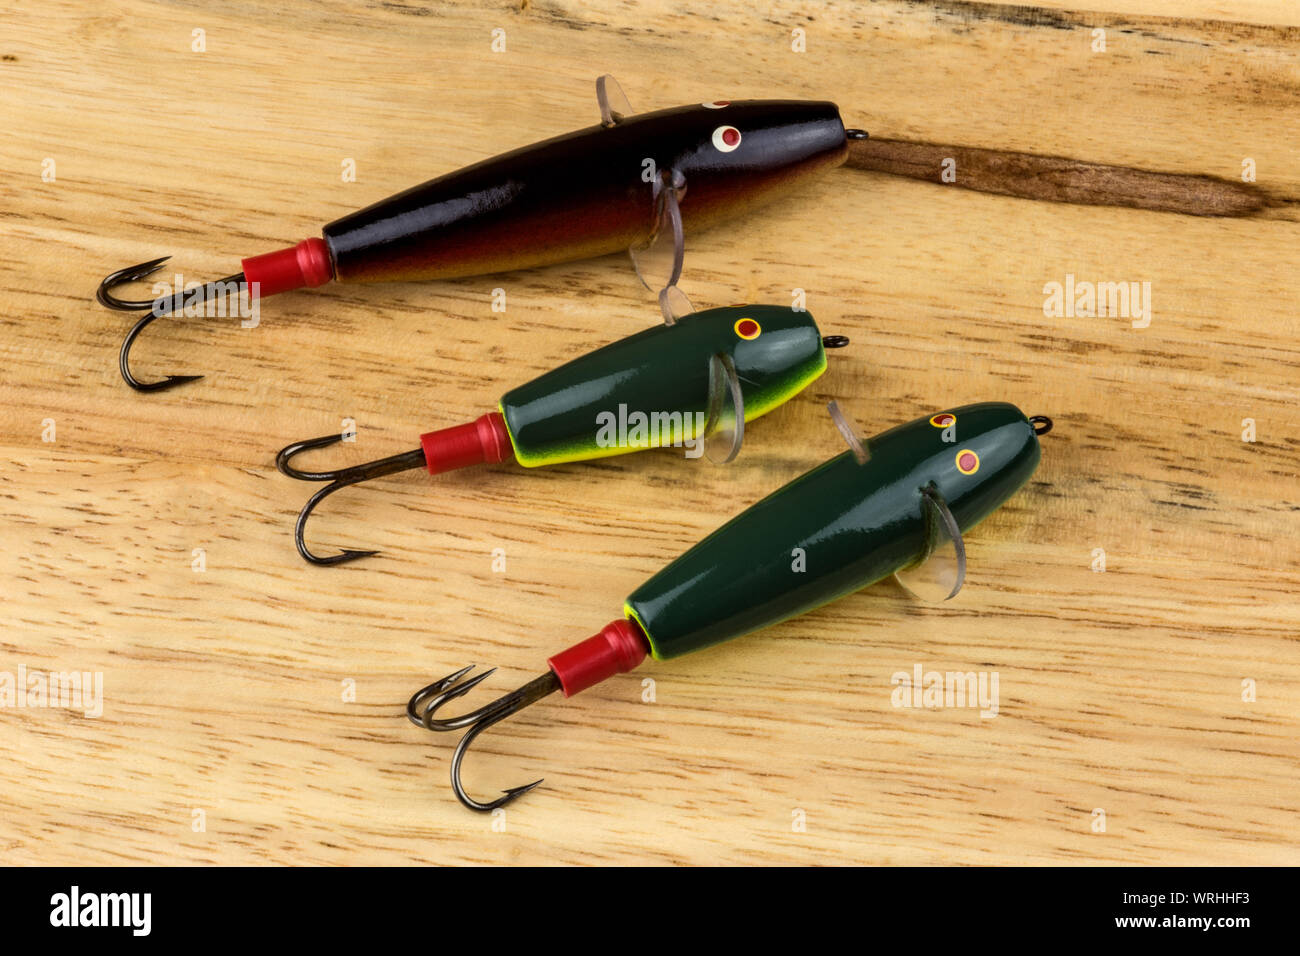 Traditional Devon Minnow salmon fishing lures on a wooden